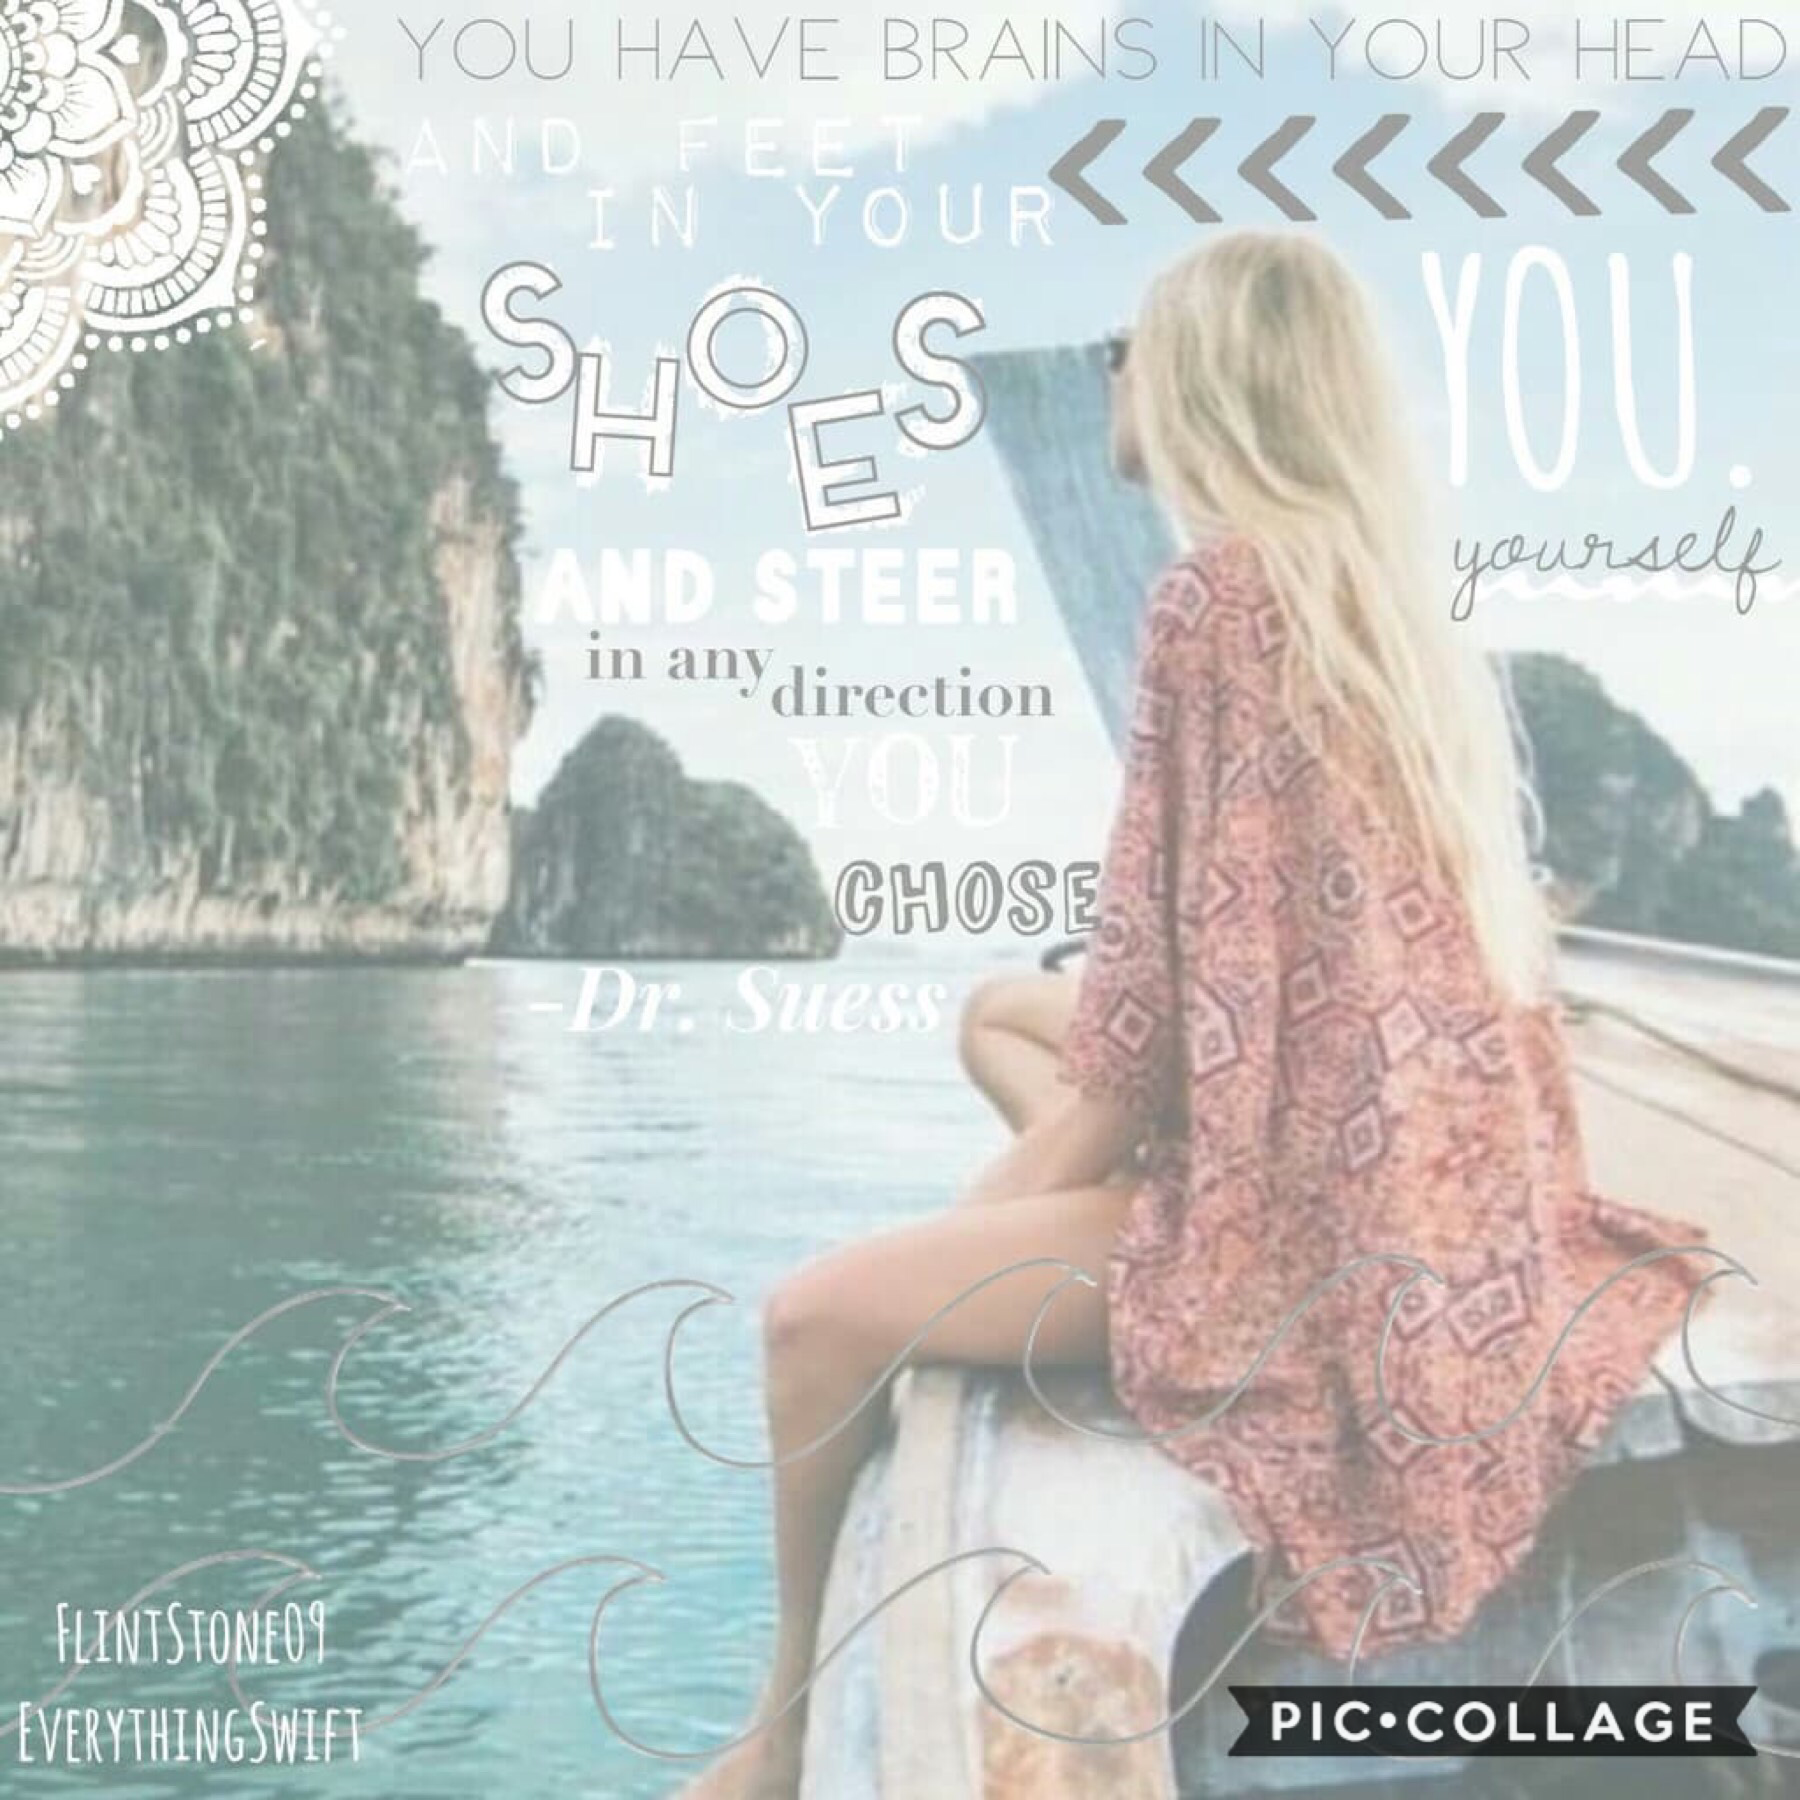 And then there was ANOTHER collab......

👌🏻💕EverythingSwift!💕👌🏻

And there’s more coming! Trying to do as many as possible before school when I get busy👍🏻